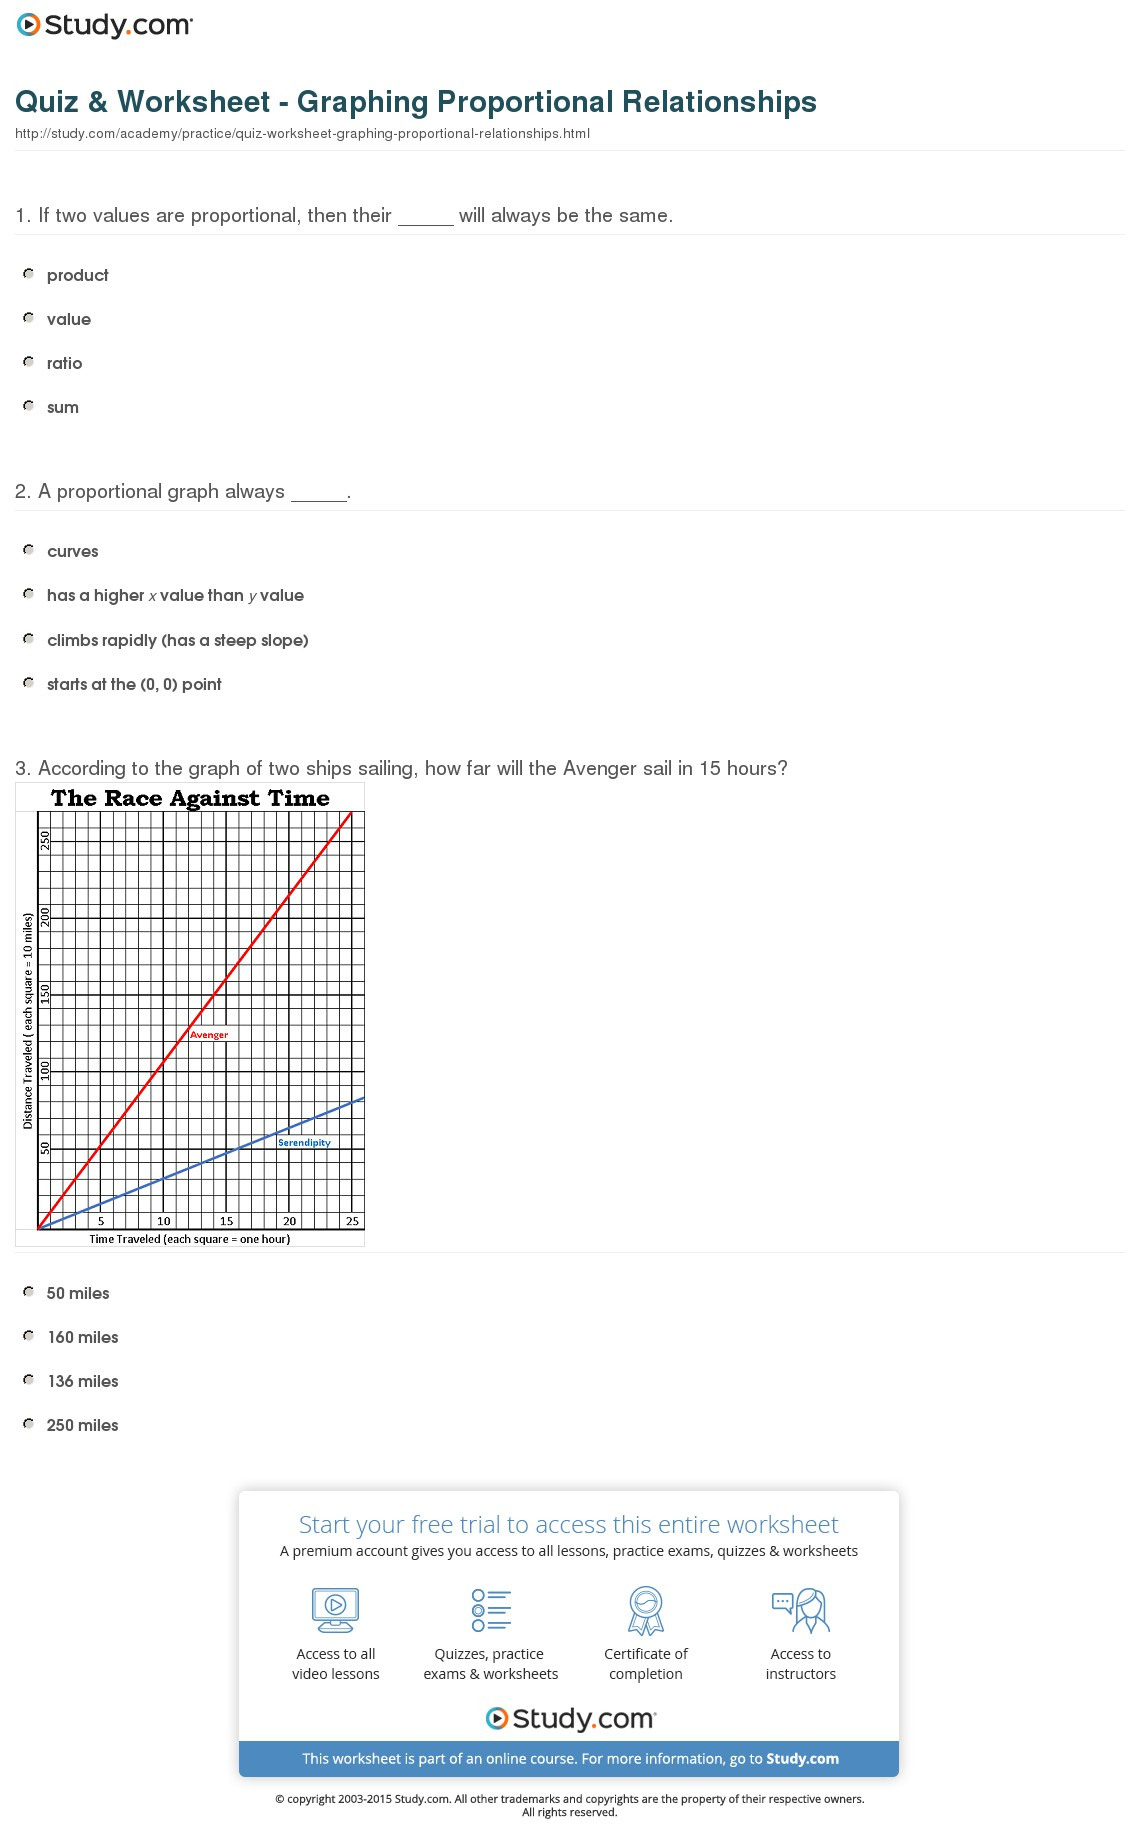 graphing-proportional-relationships-worksheet-db-excel